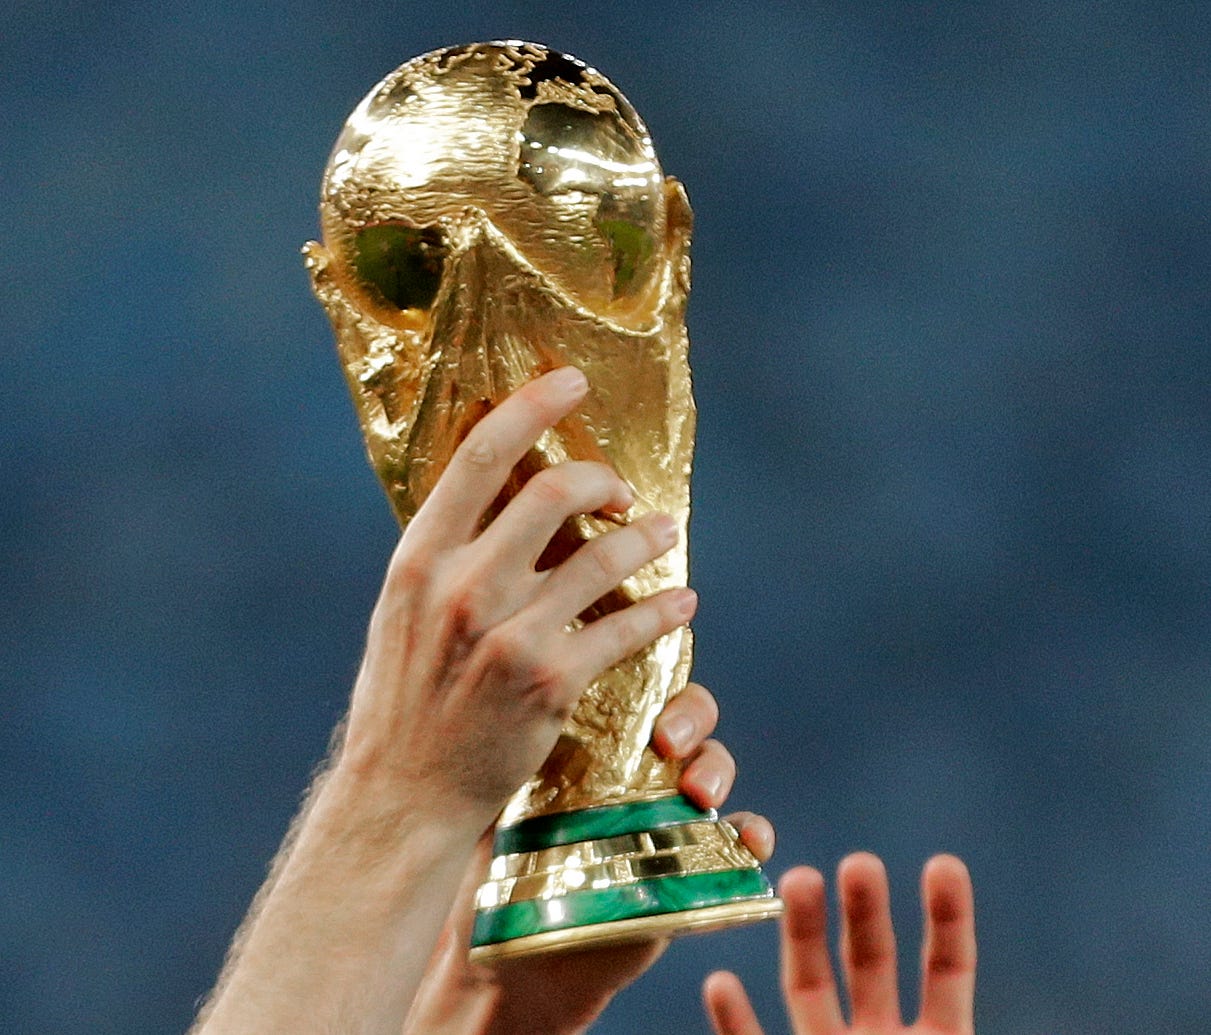 Not everyone is clamoring to host the FIFA World Cup in 2026, and with good reason.